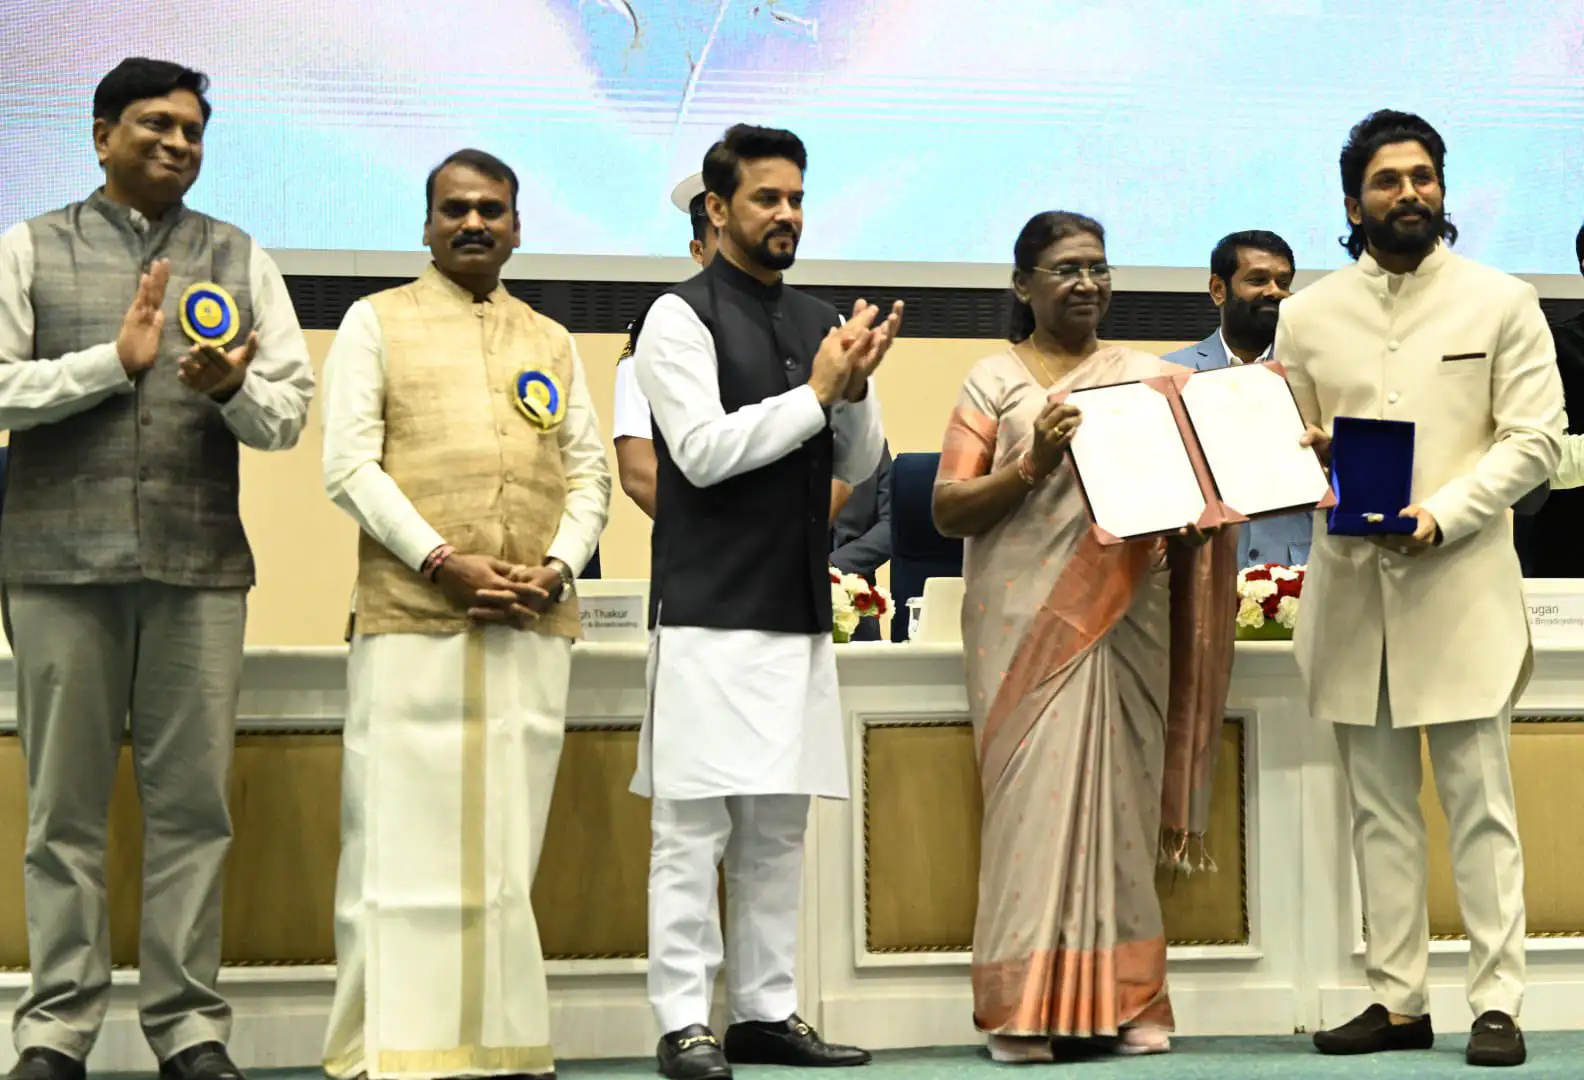 Allu Arjun with other Awardees at National Awards Event  